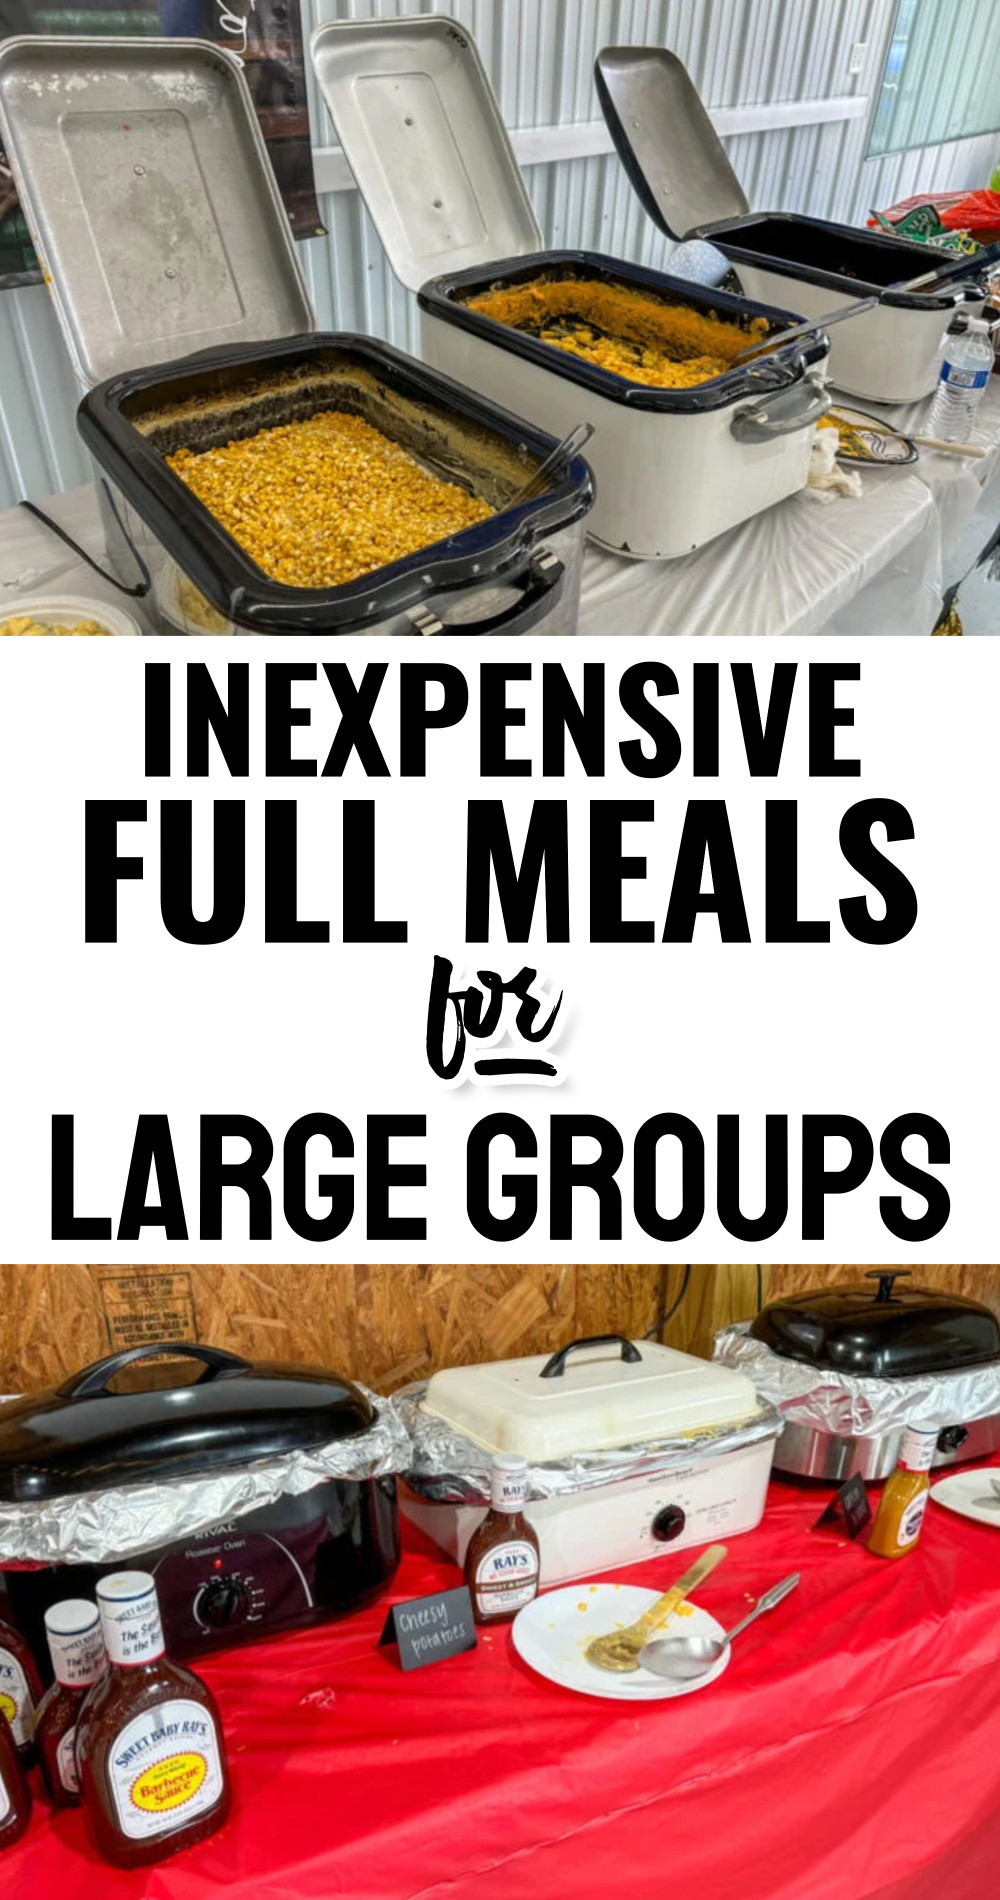 Full Meals For Large Groups